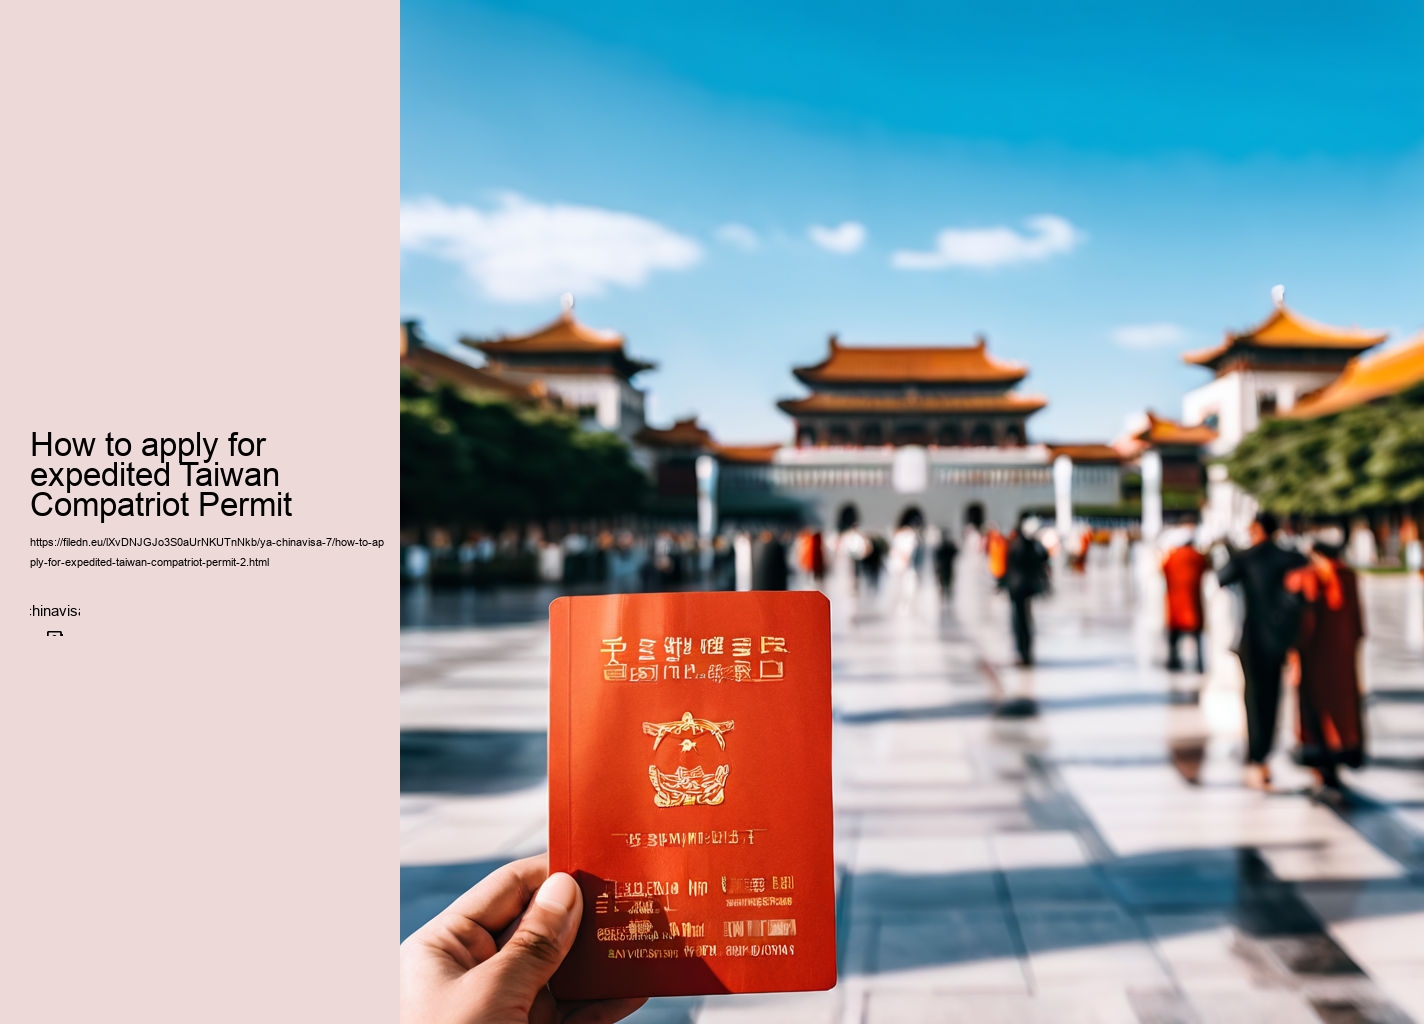 How to apply for expedited Taiwan Compatriot Permit